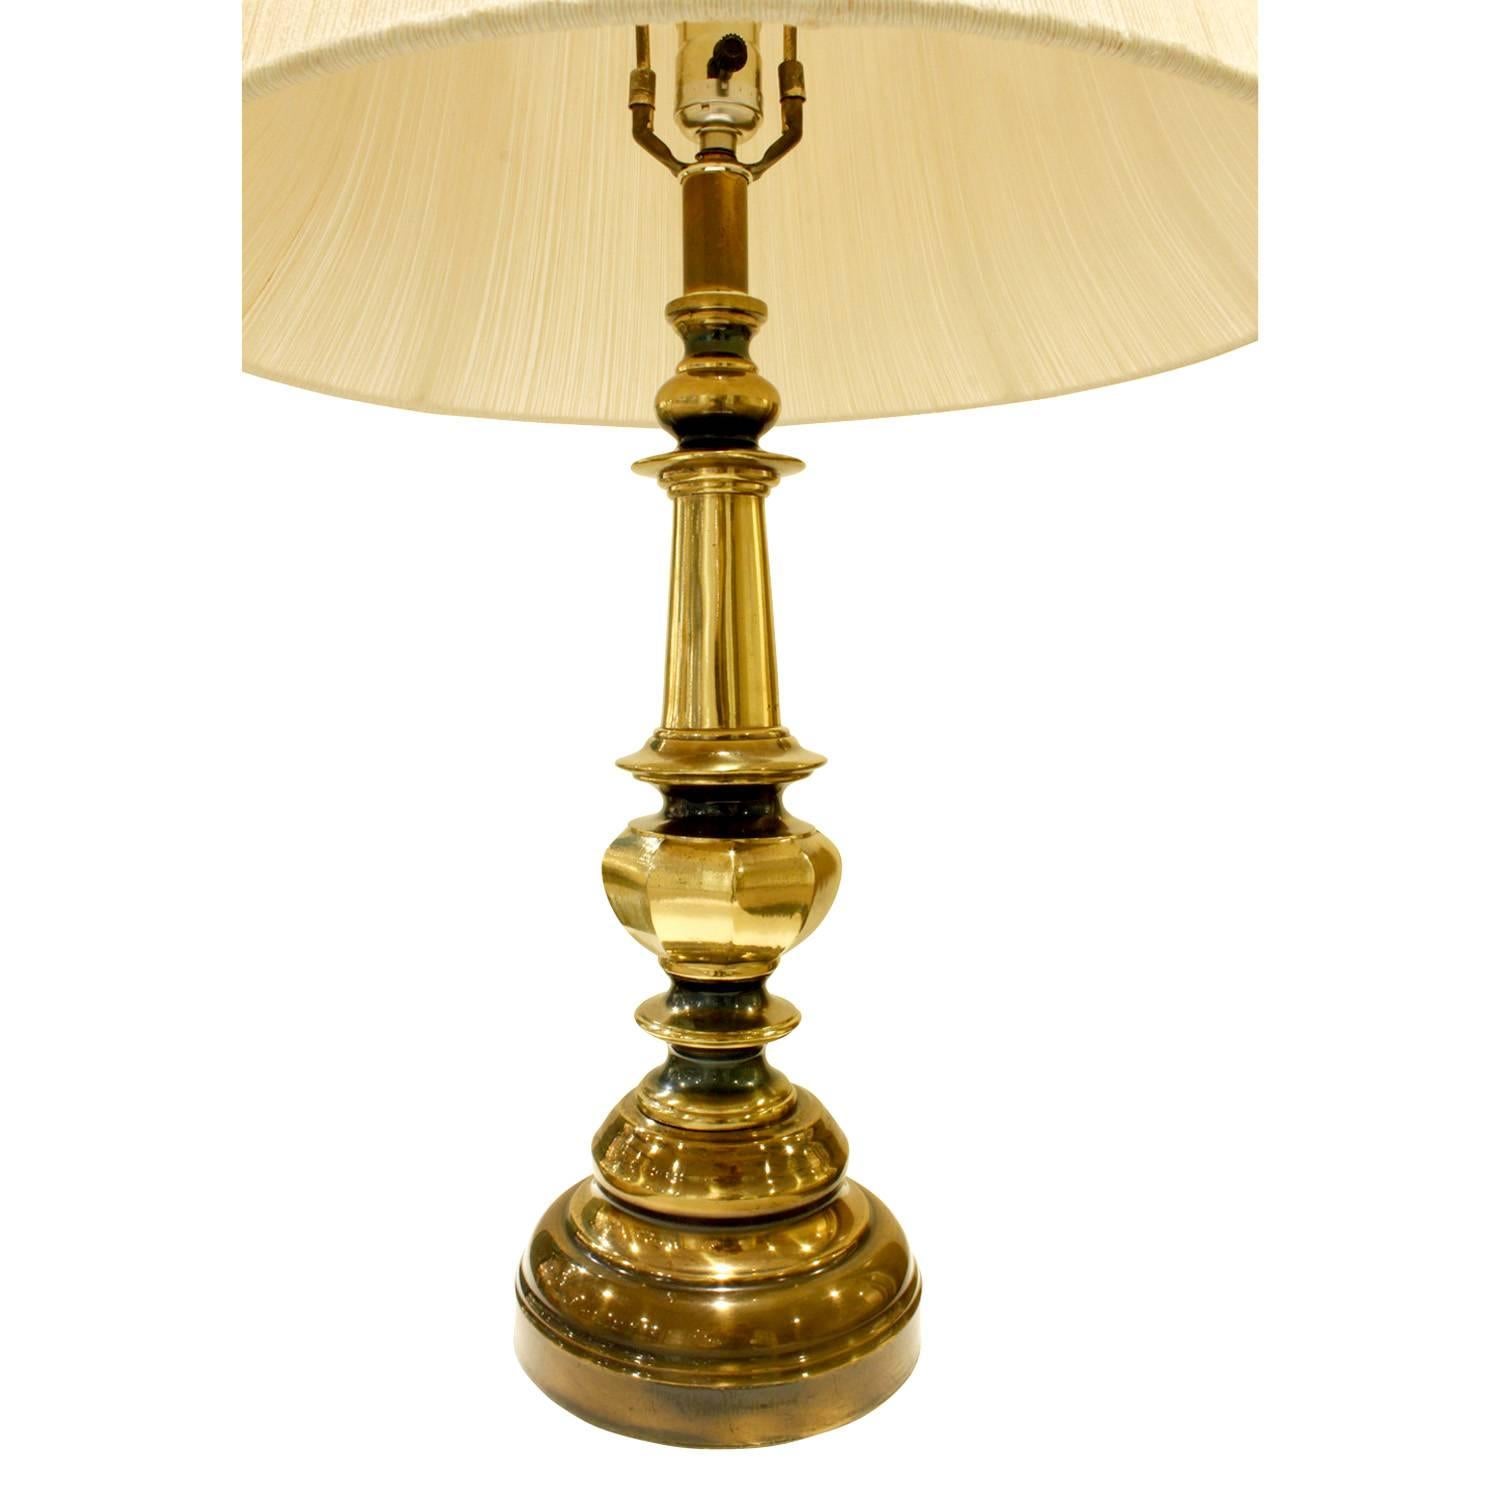 Small sculptural table lamp in bronze and brass, American, 1960s.